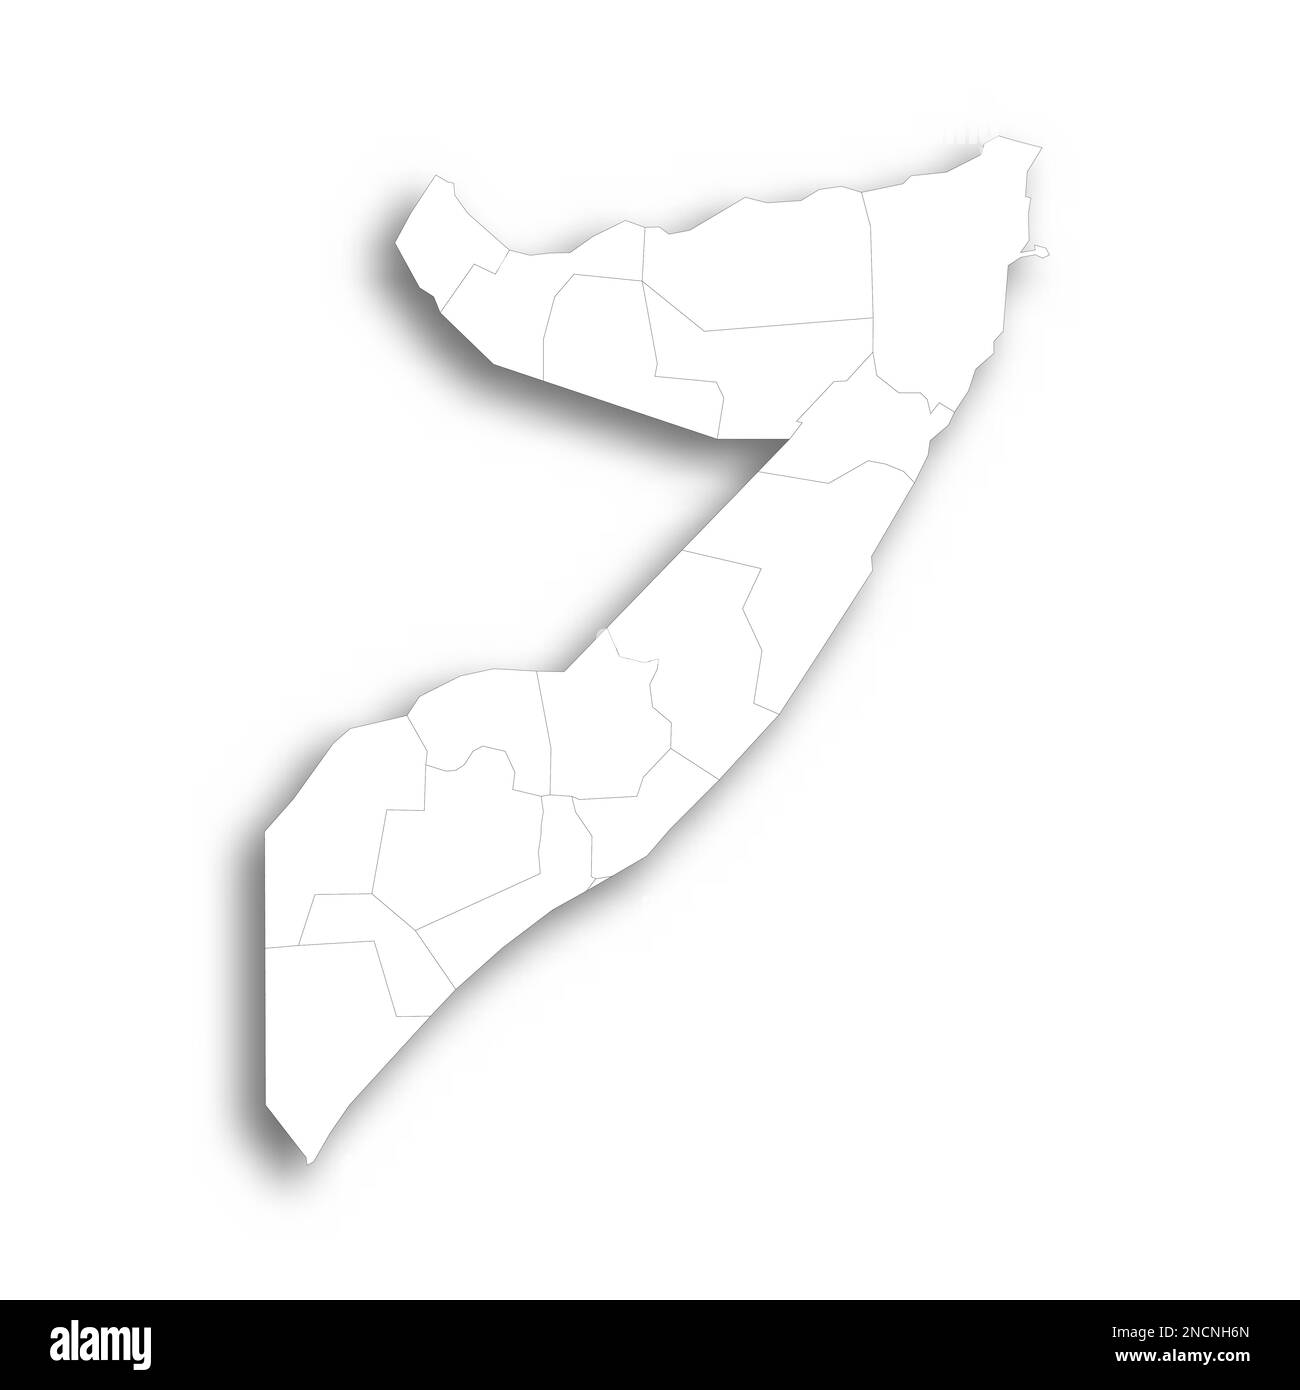 Somalia political map of administrative divisions - federal states. Flat white blank map with thin black outline and dropped shadow. Stock Vector